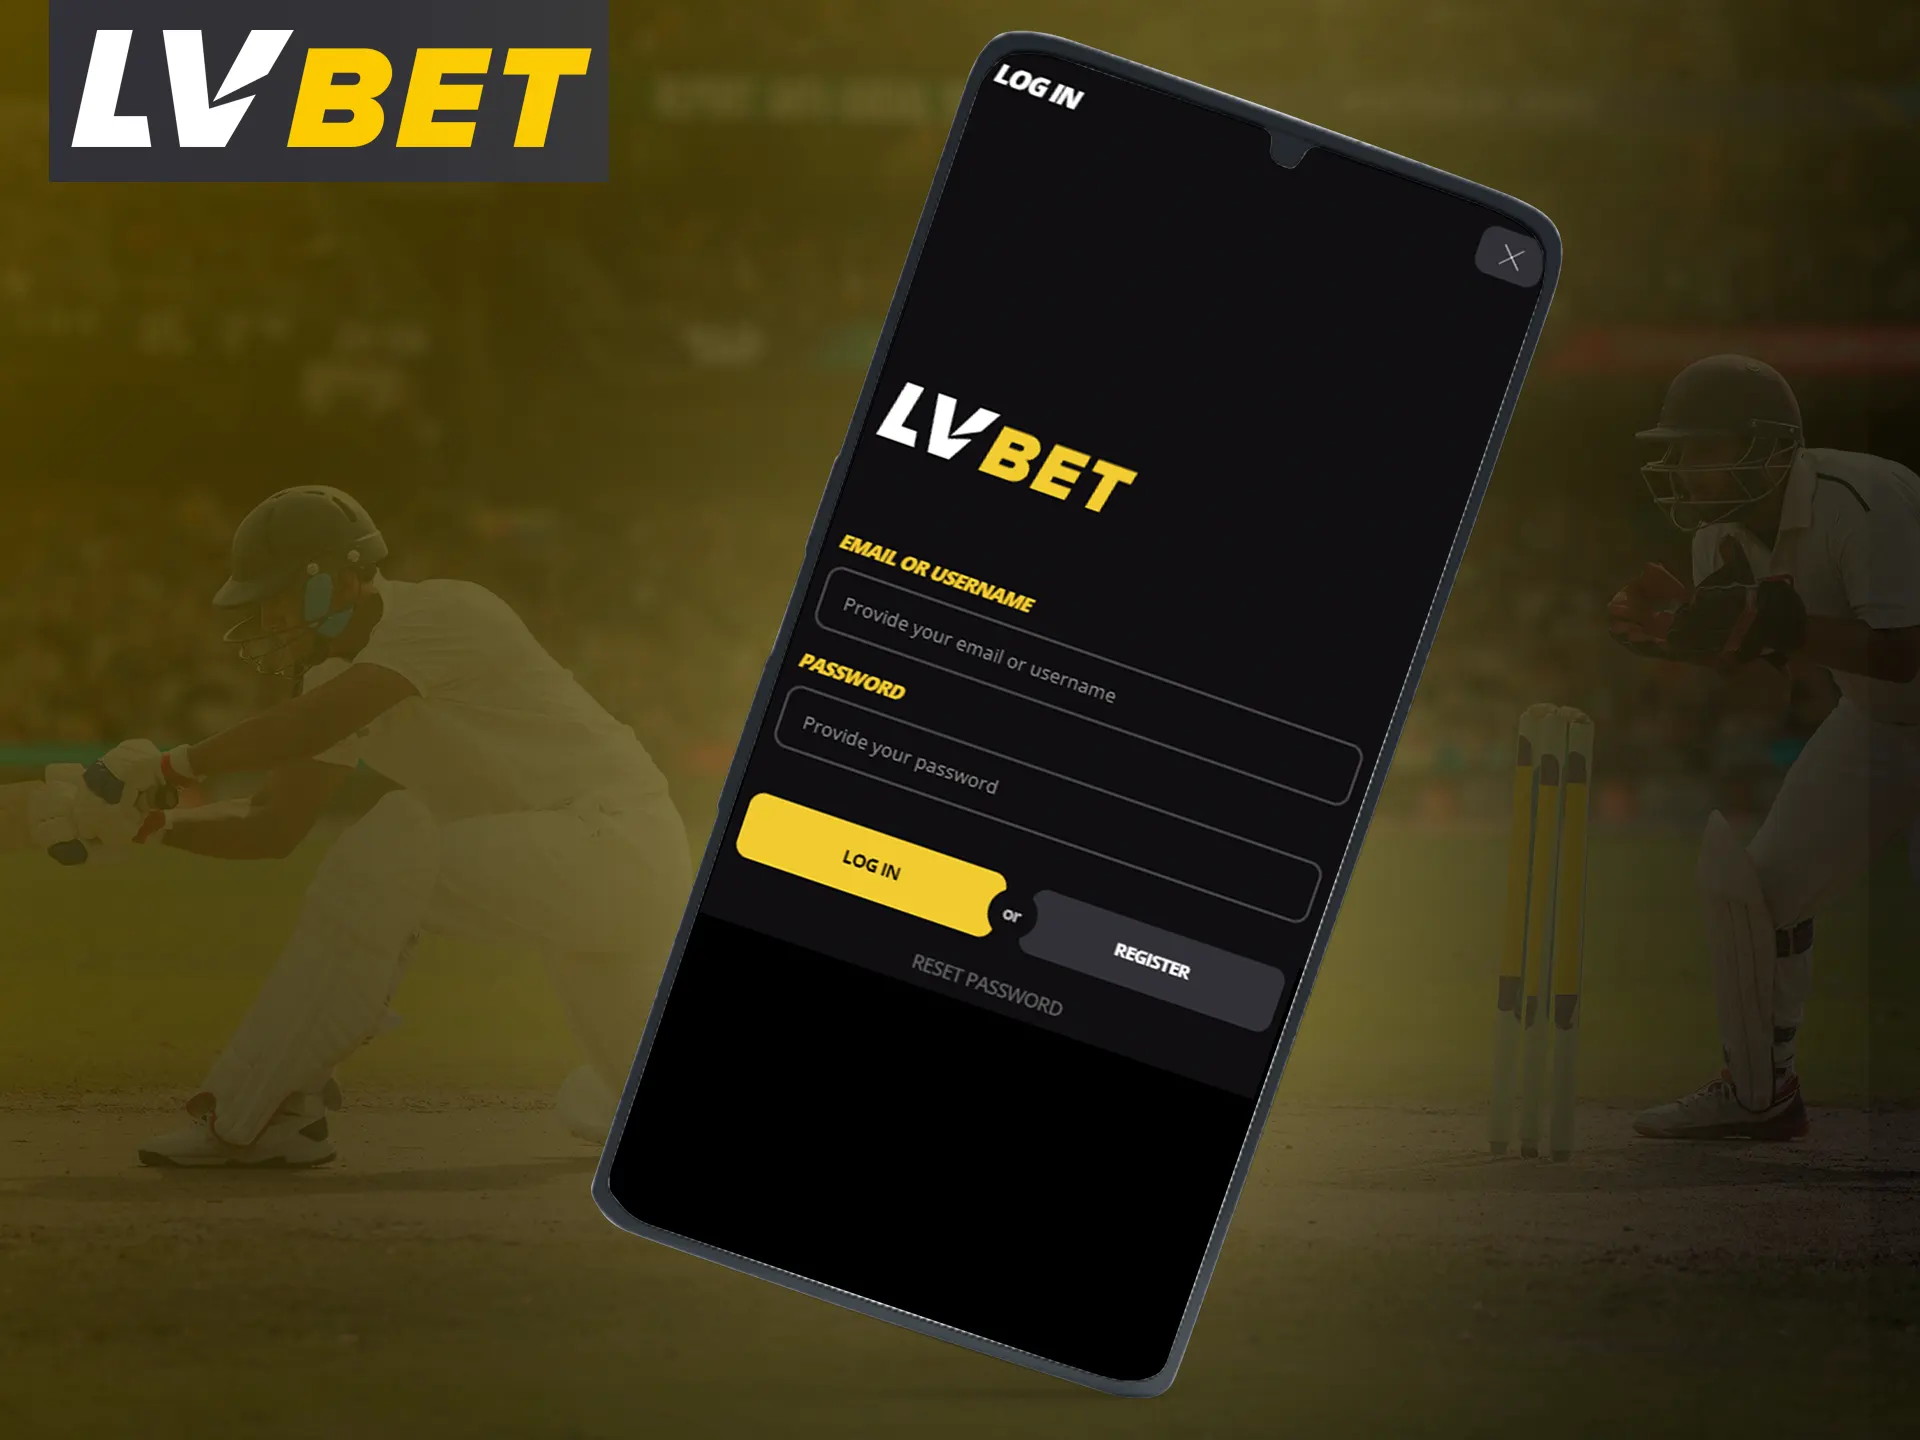 Log in to your account on the LV Bet app.